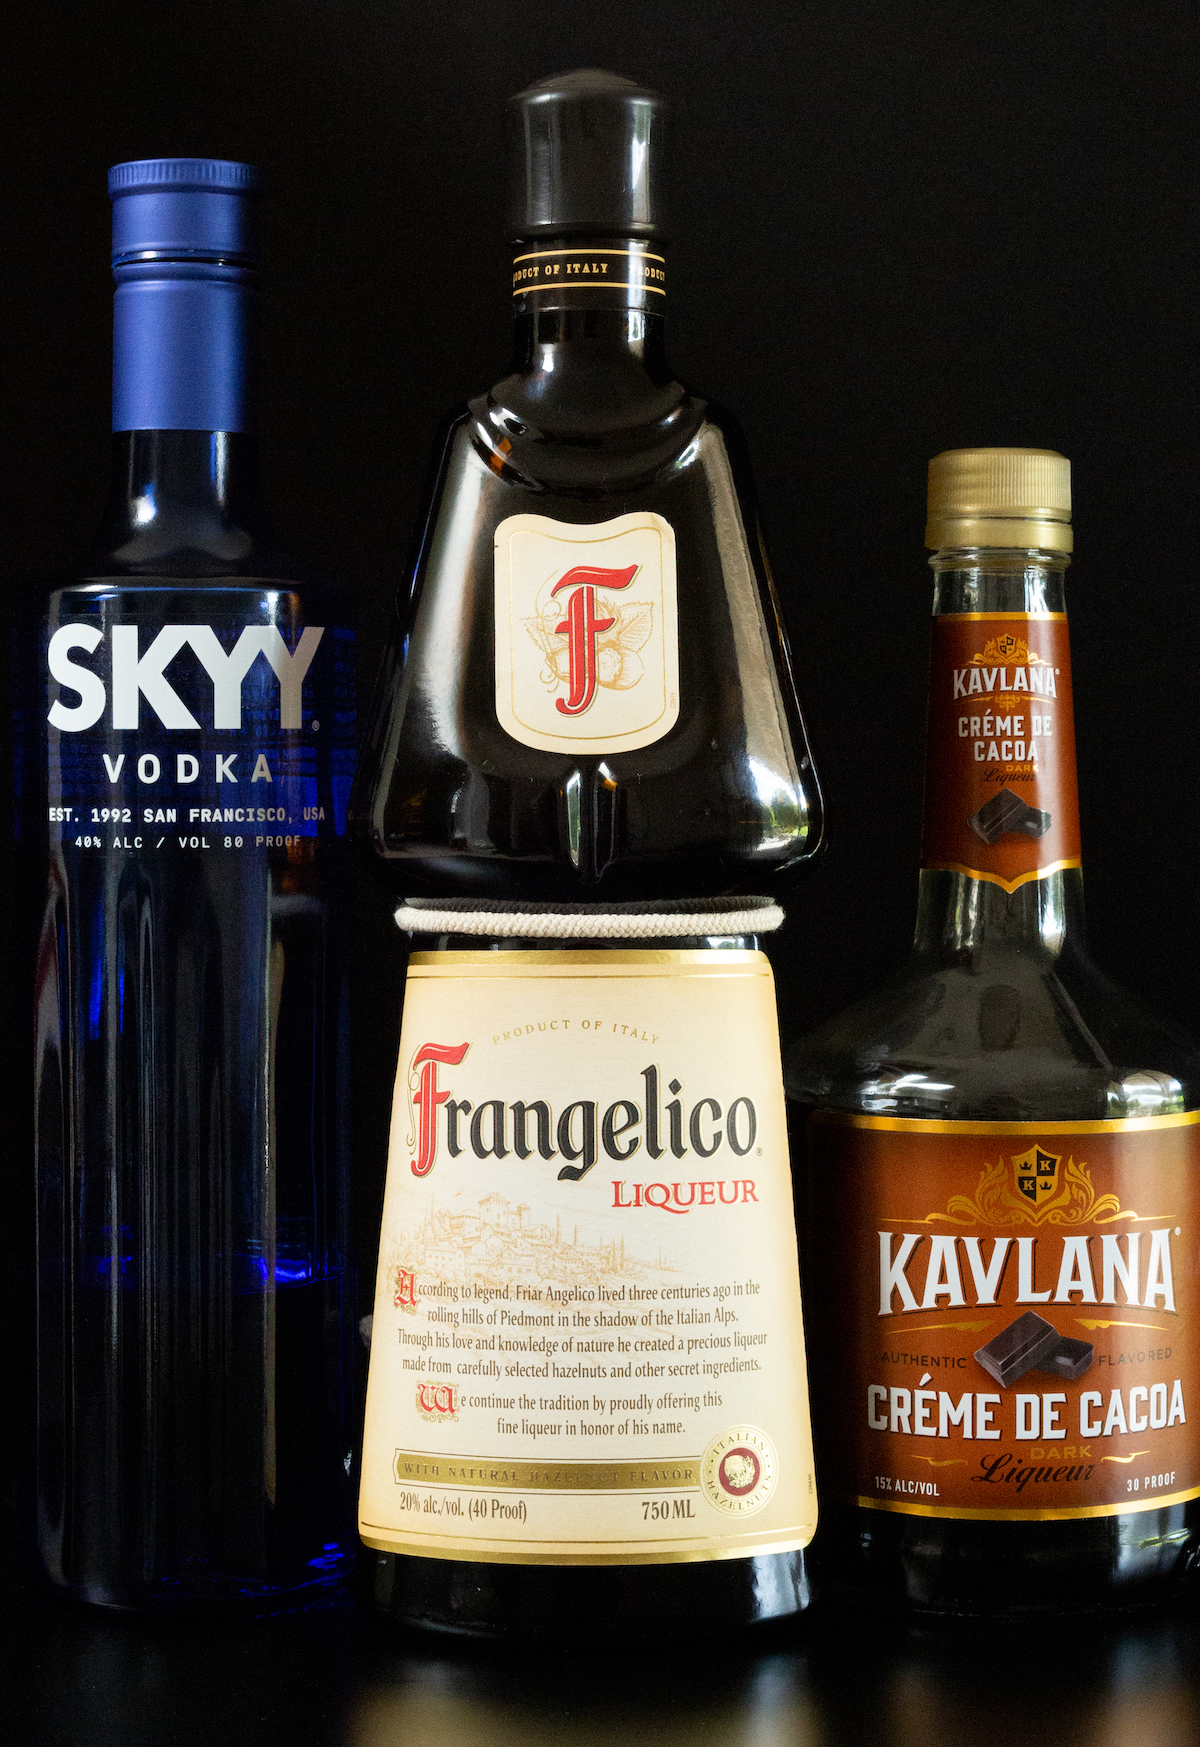 A bottle of Skyy vodka, Frangelico liqueur, and creme de cacao all on a black background.